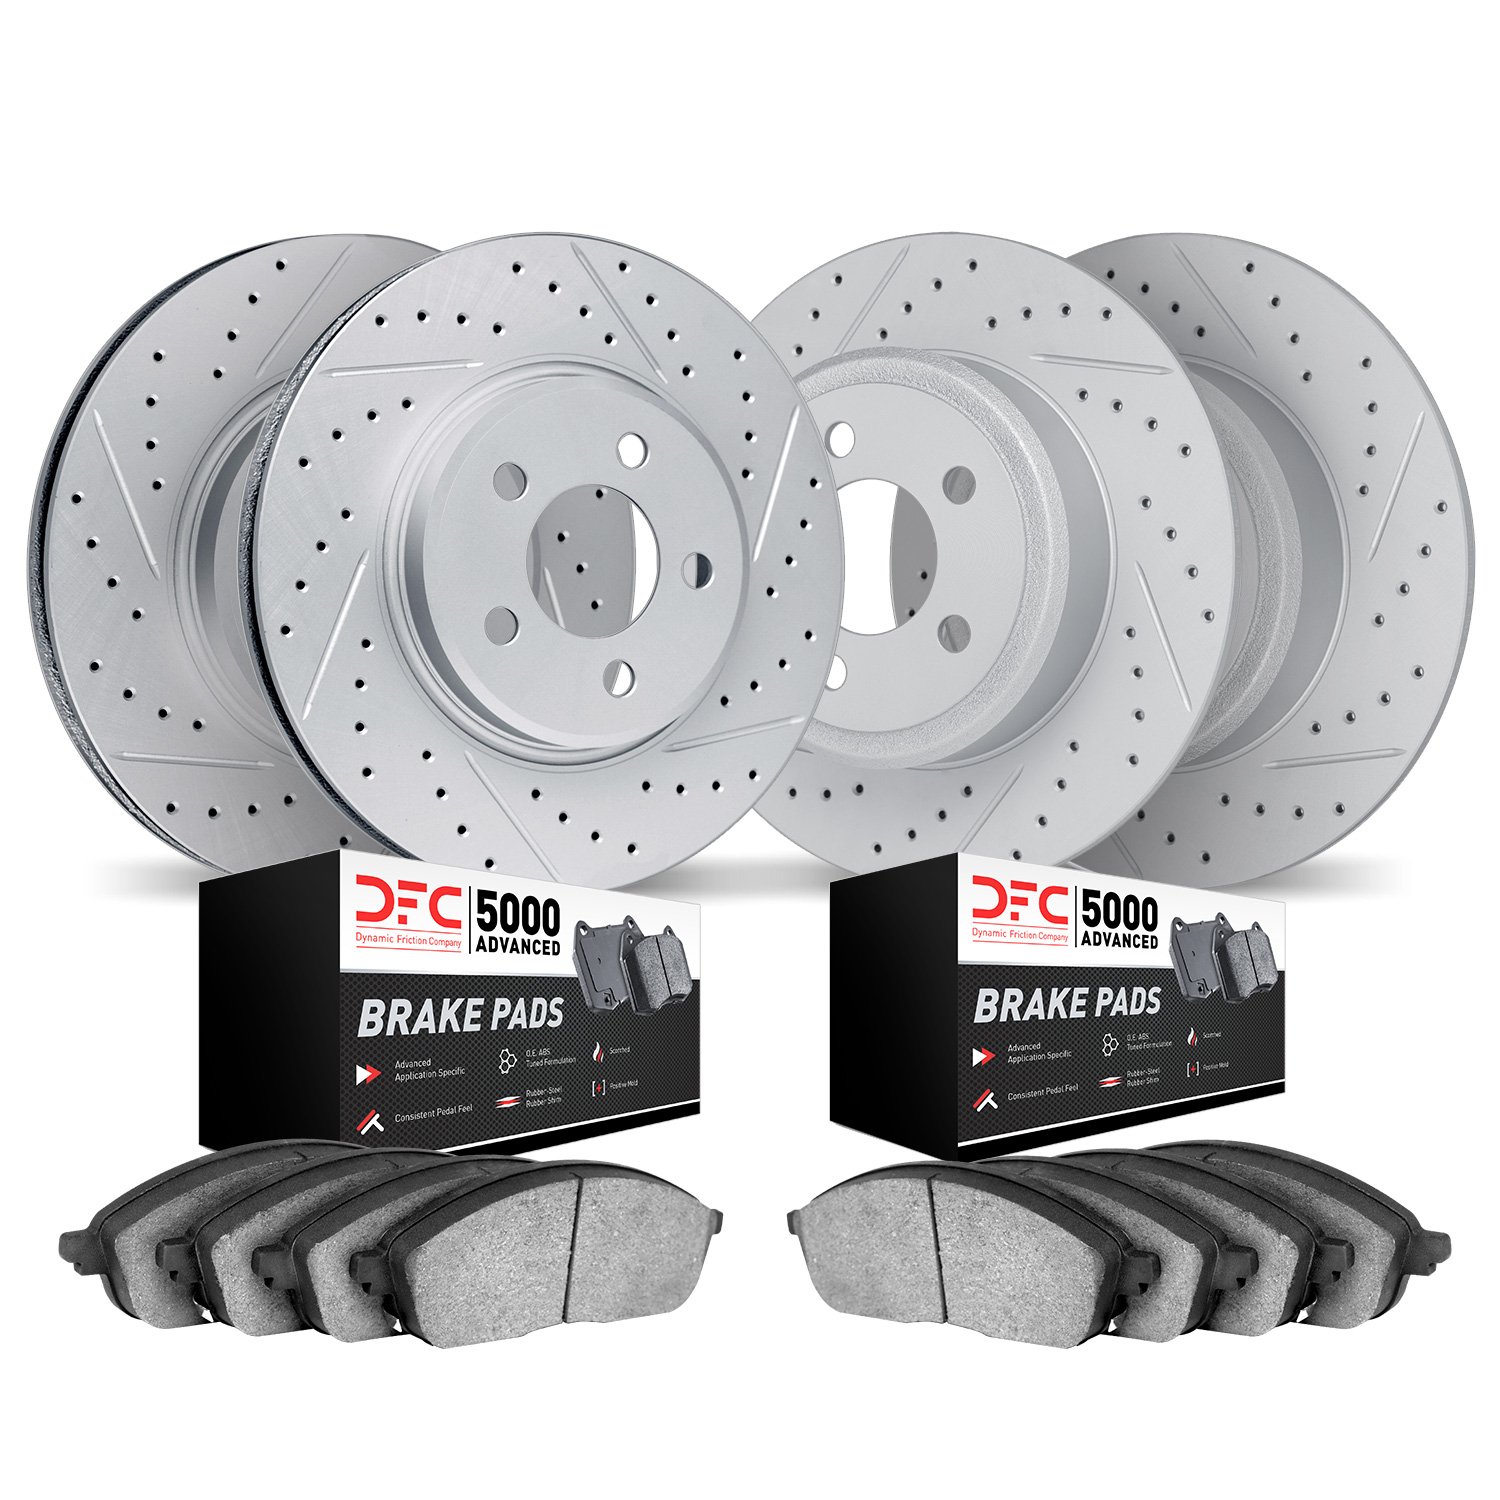 2504-80022 Geoperformance Drilled/Slotted Rotors w/5000 Advanced Brake Pads Kit, 2014-2016 Ford/Lincoln/Mercury/Mazda, Position: